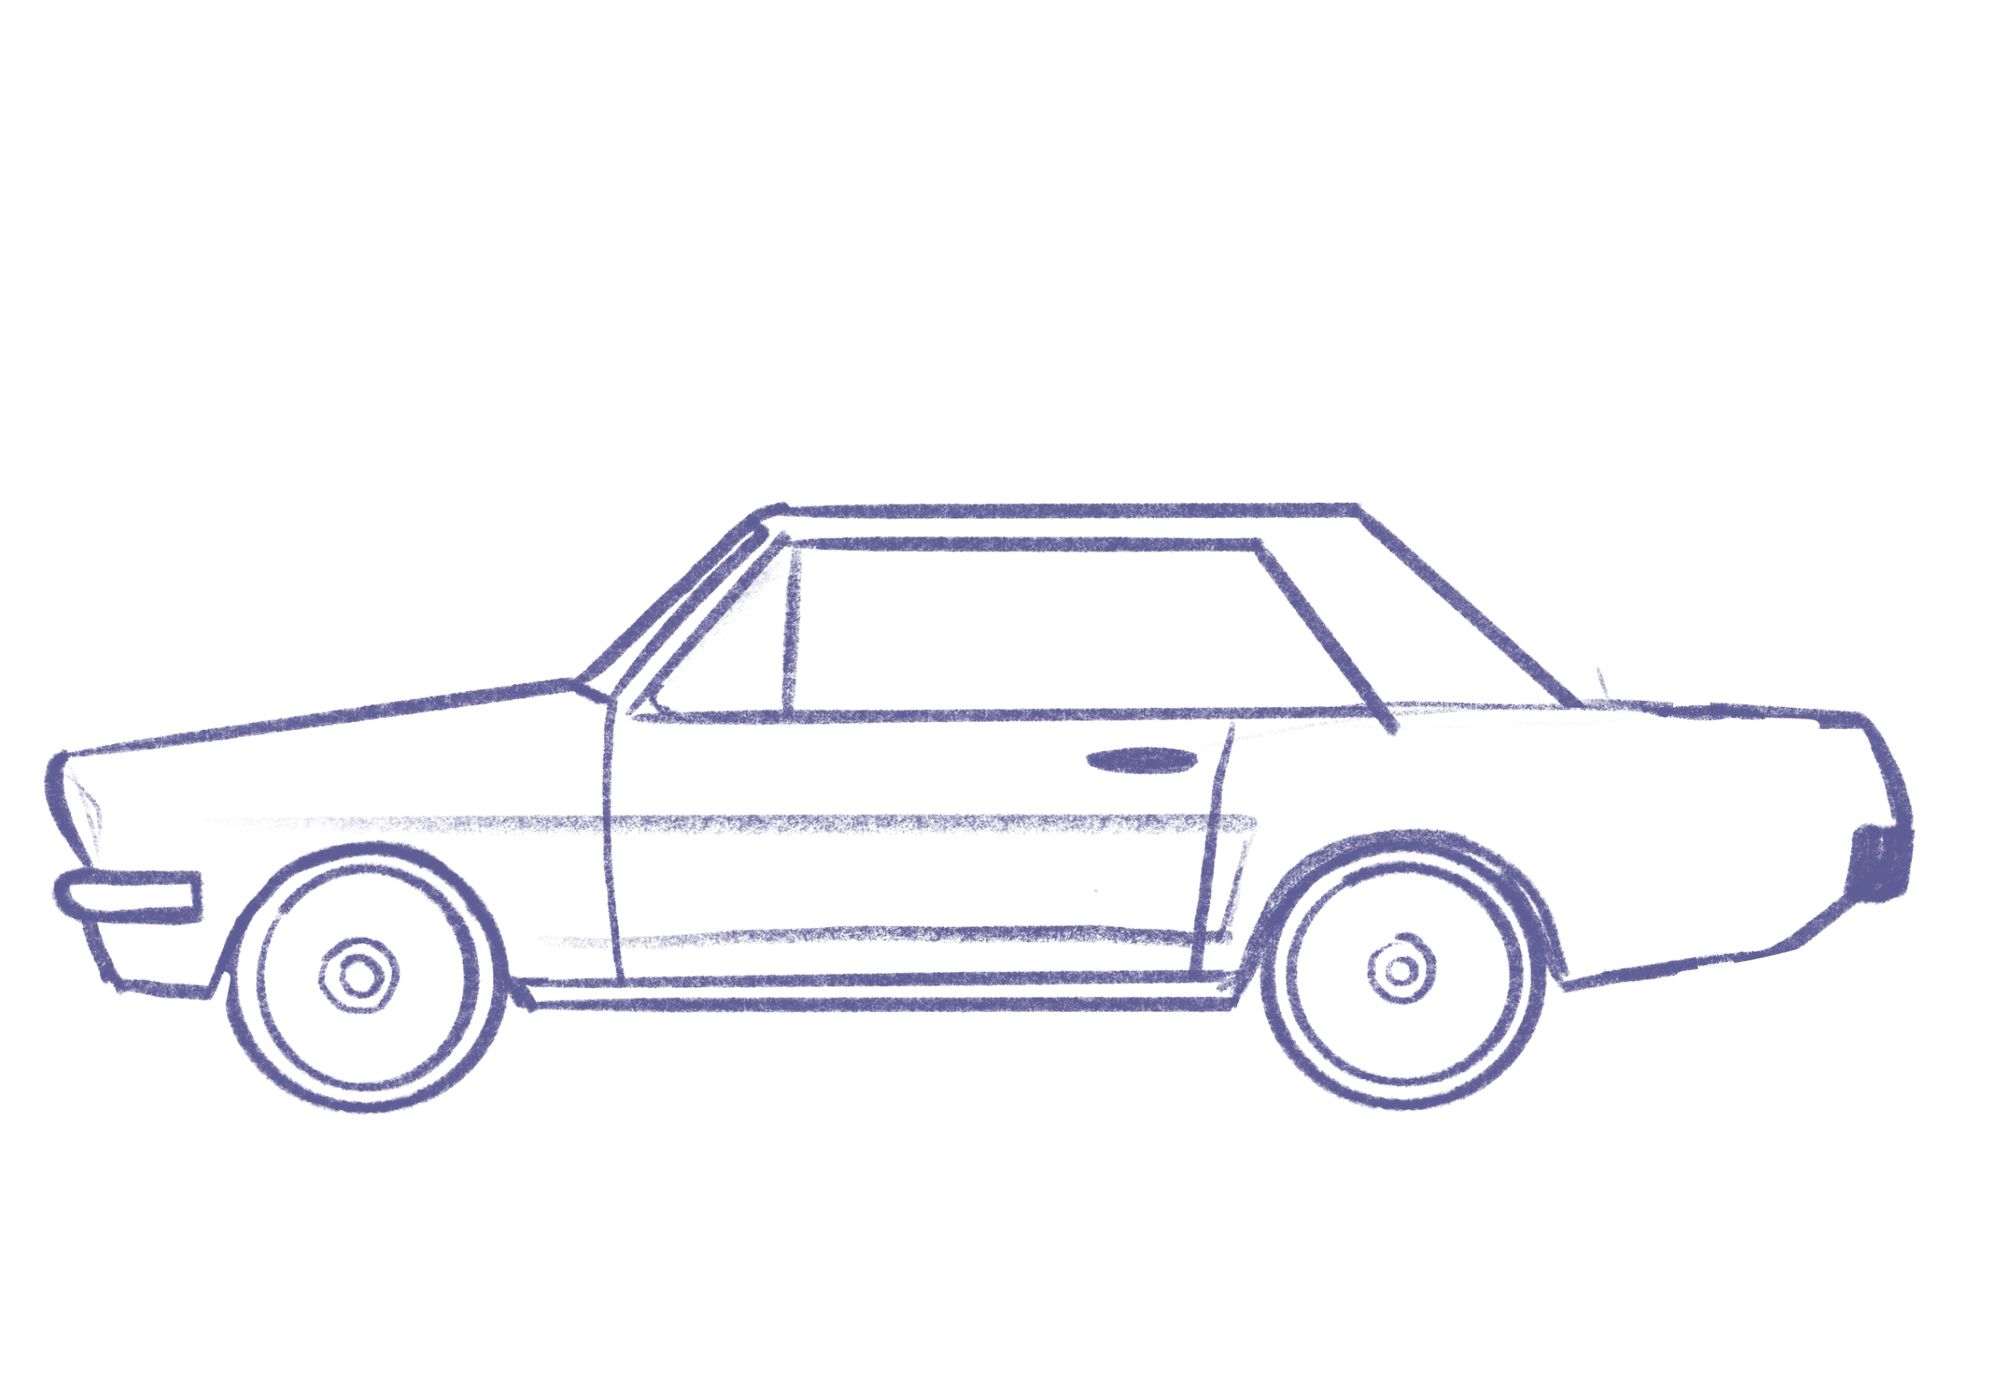 how to draw a cool car easy